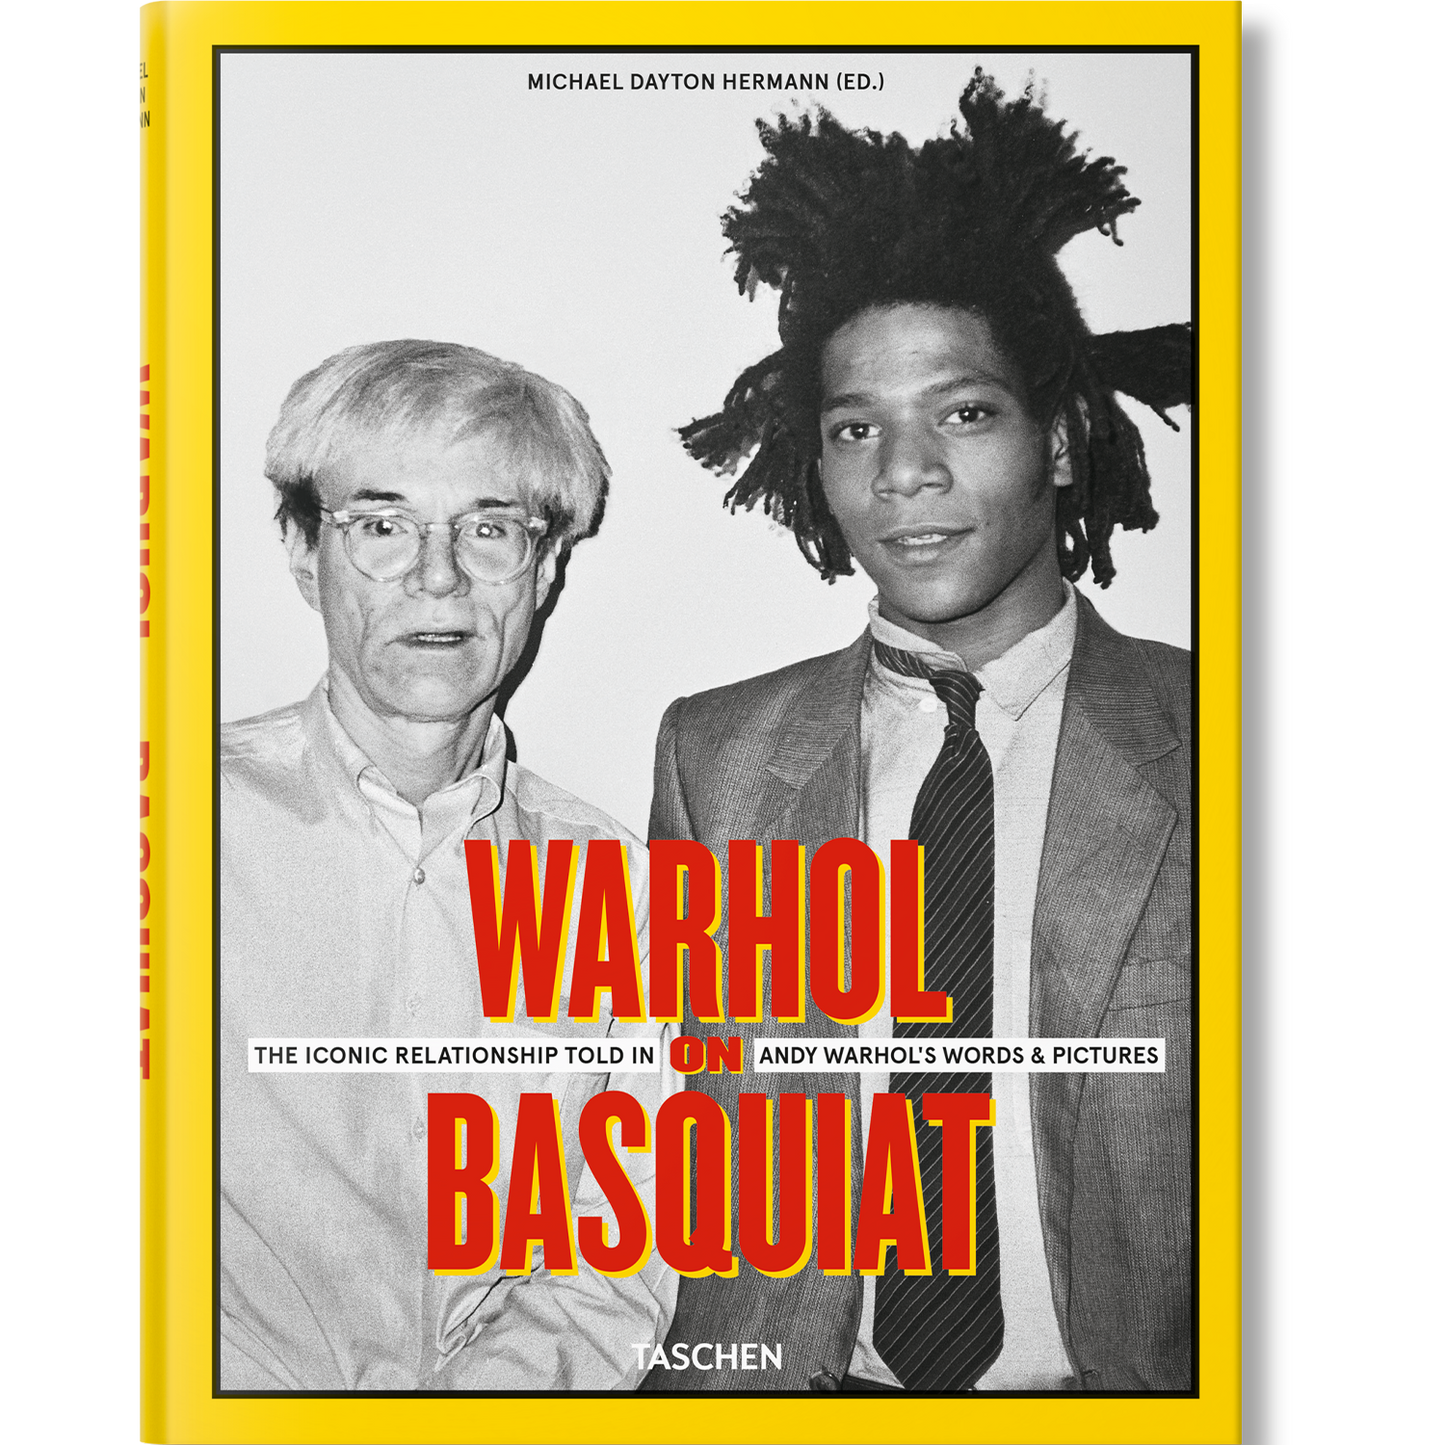 Warhol on Basquiat: The Iconic Relationship Told in Andy Warhol’s Words and Pictures (Multilingual Edition) (Hardcover